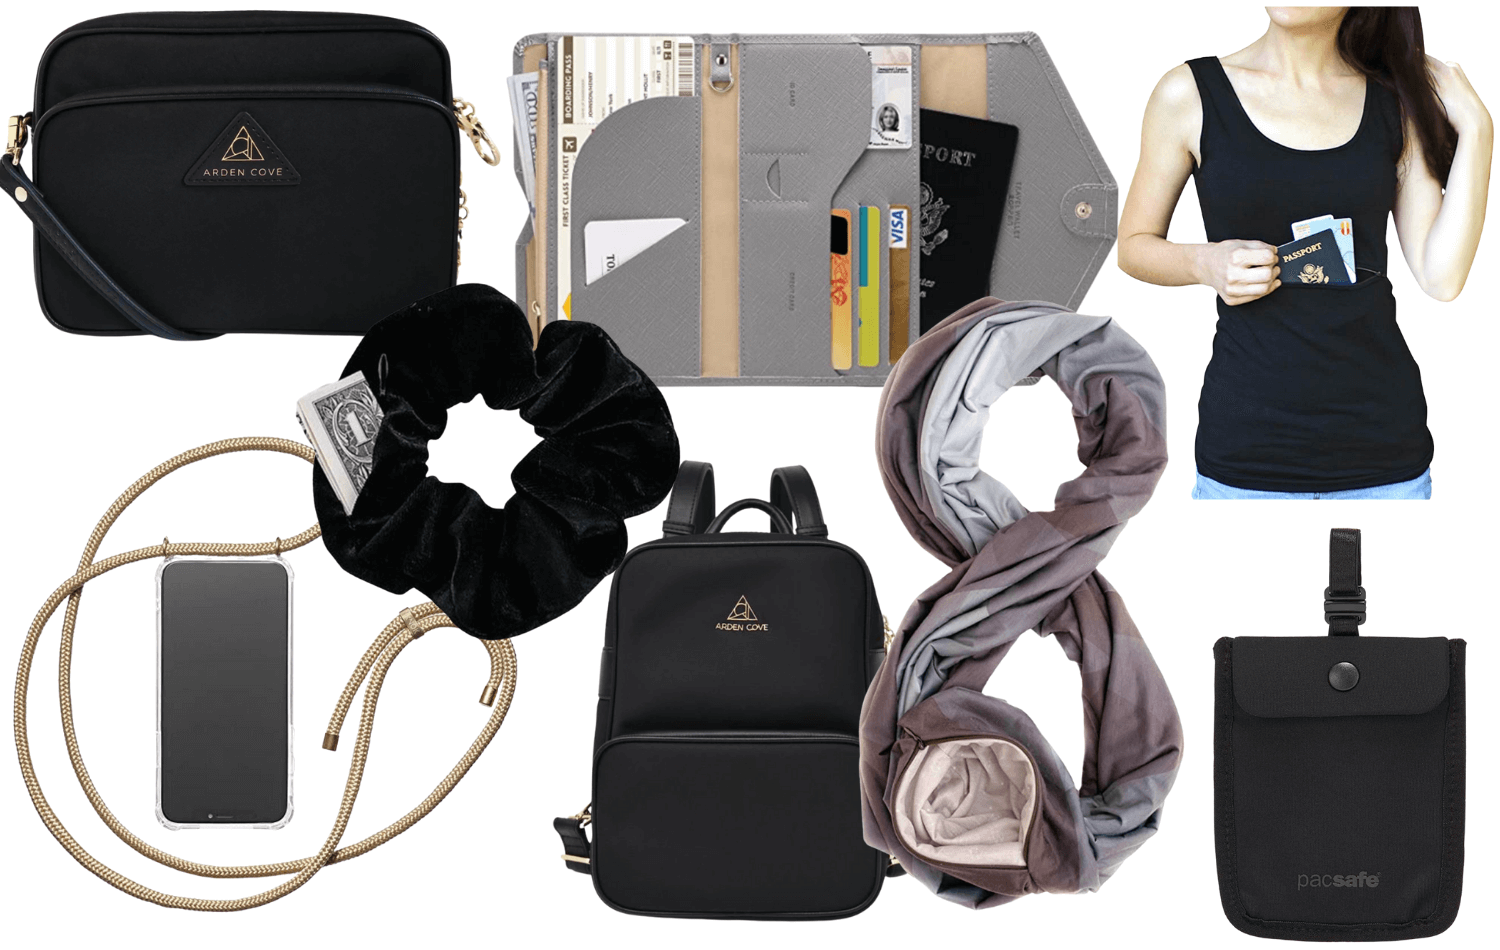 GIFT GUIDE: 8 Anti-Theft Travel Accessories for Female Travelers